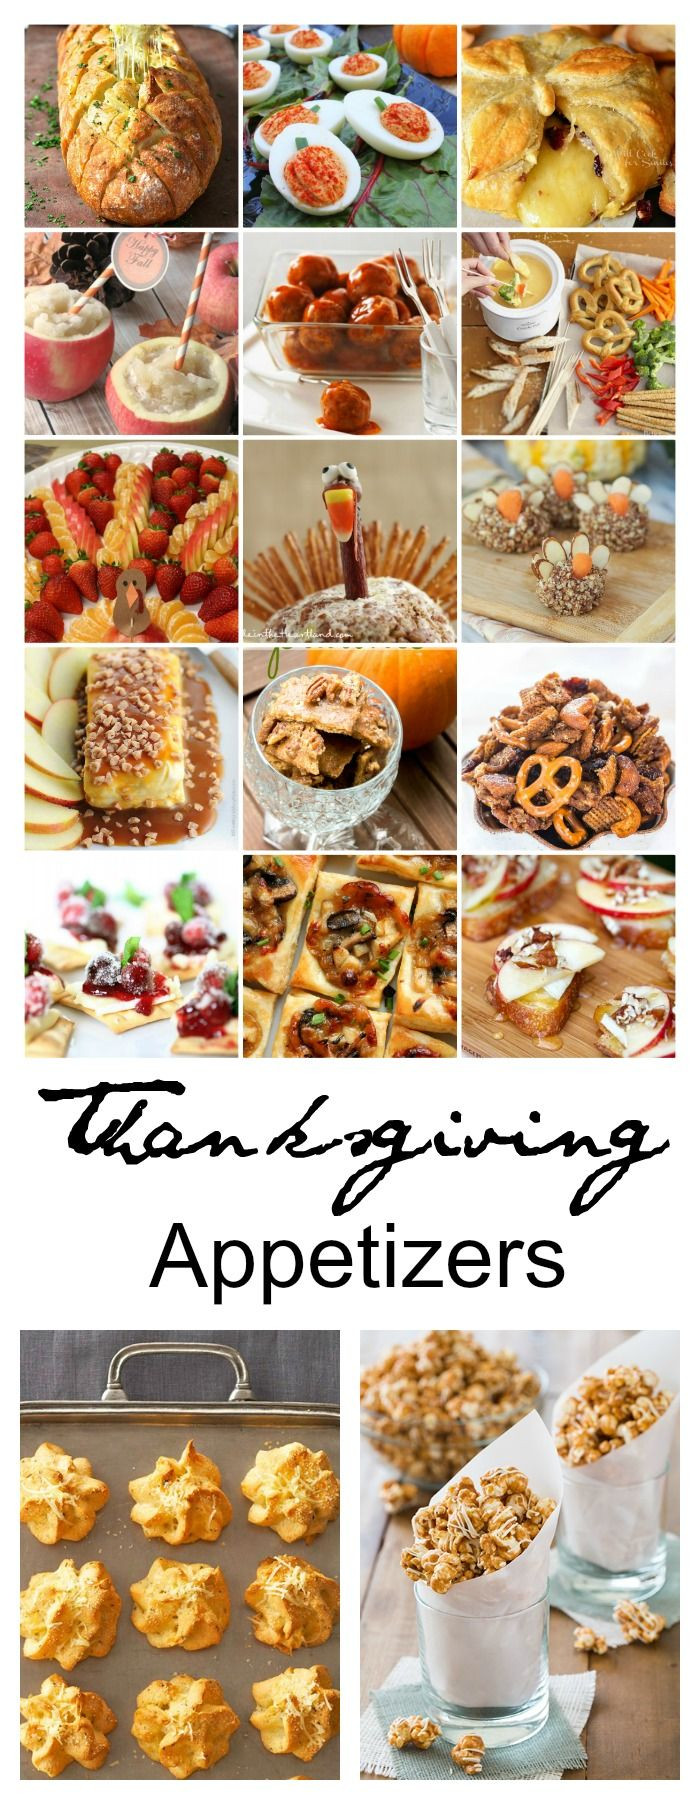 Best Thanksgiving Appetizers
 25 best ideas about Thanksgiving appetizers on Pinterest